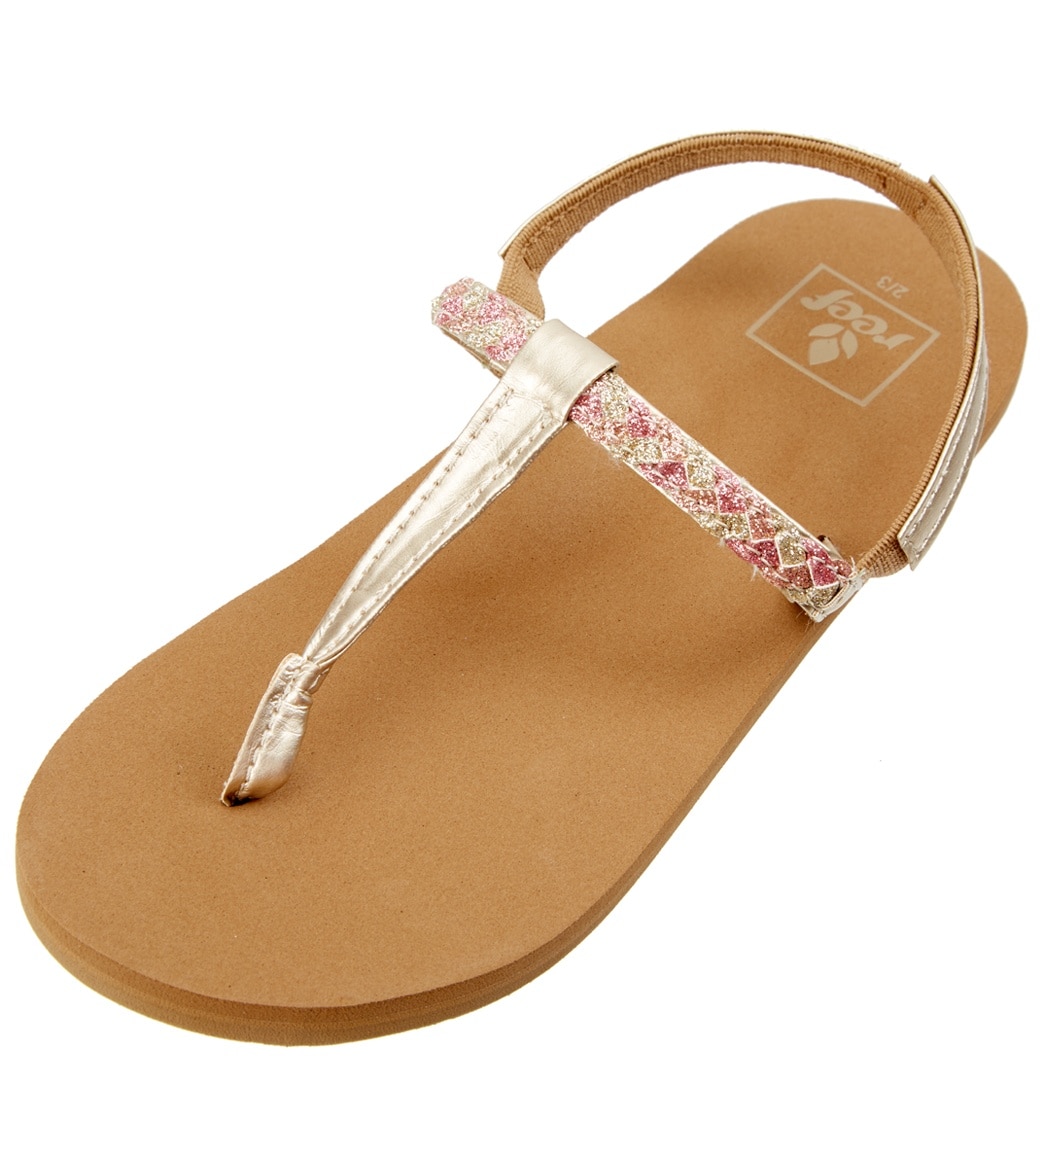 Reef Girls' Little Twisted T Strap Sandals Toddler Kid Big Kid - Tan/Pink 5/6 - Swimoutlet.com